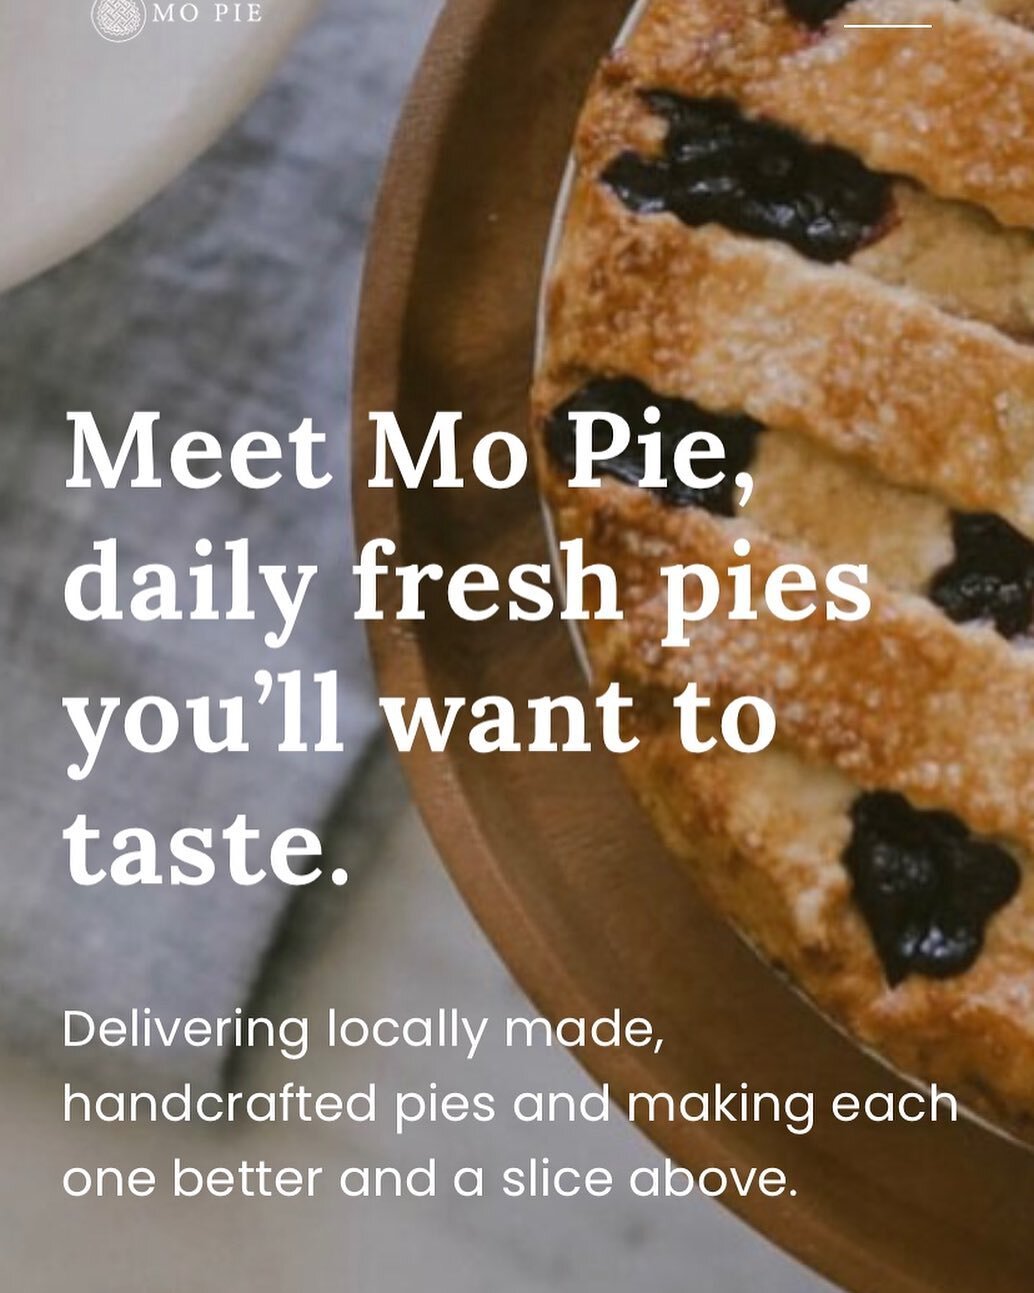 Are you interested in joining a fun, creative start up company?! MO Pie is looking for an energetic and excited individual to join to the team and assist in baking and distribution. DM or email for more information!